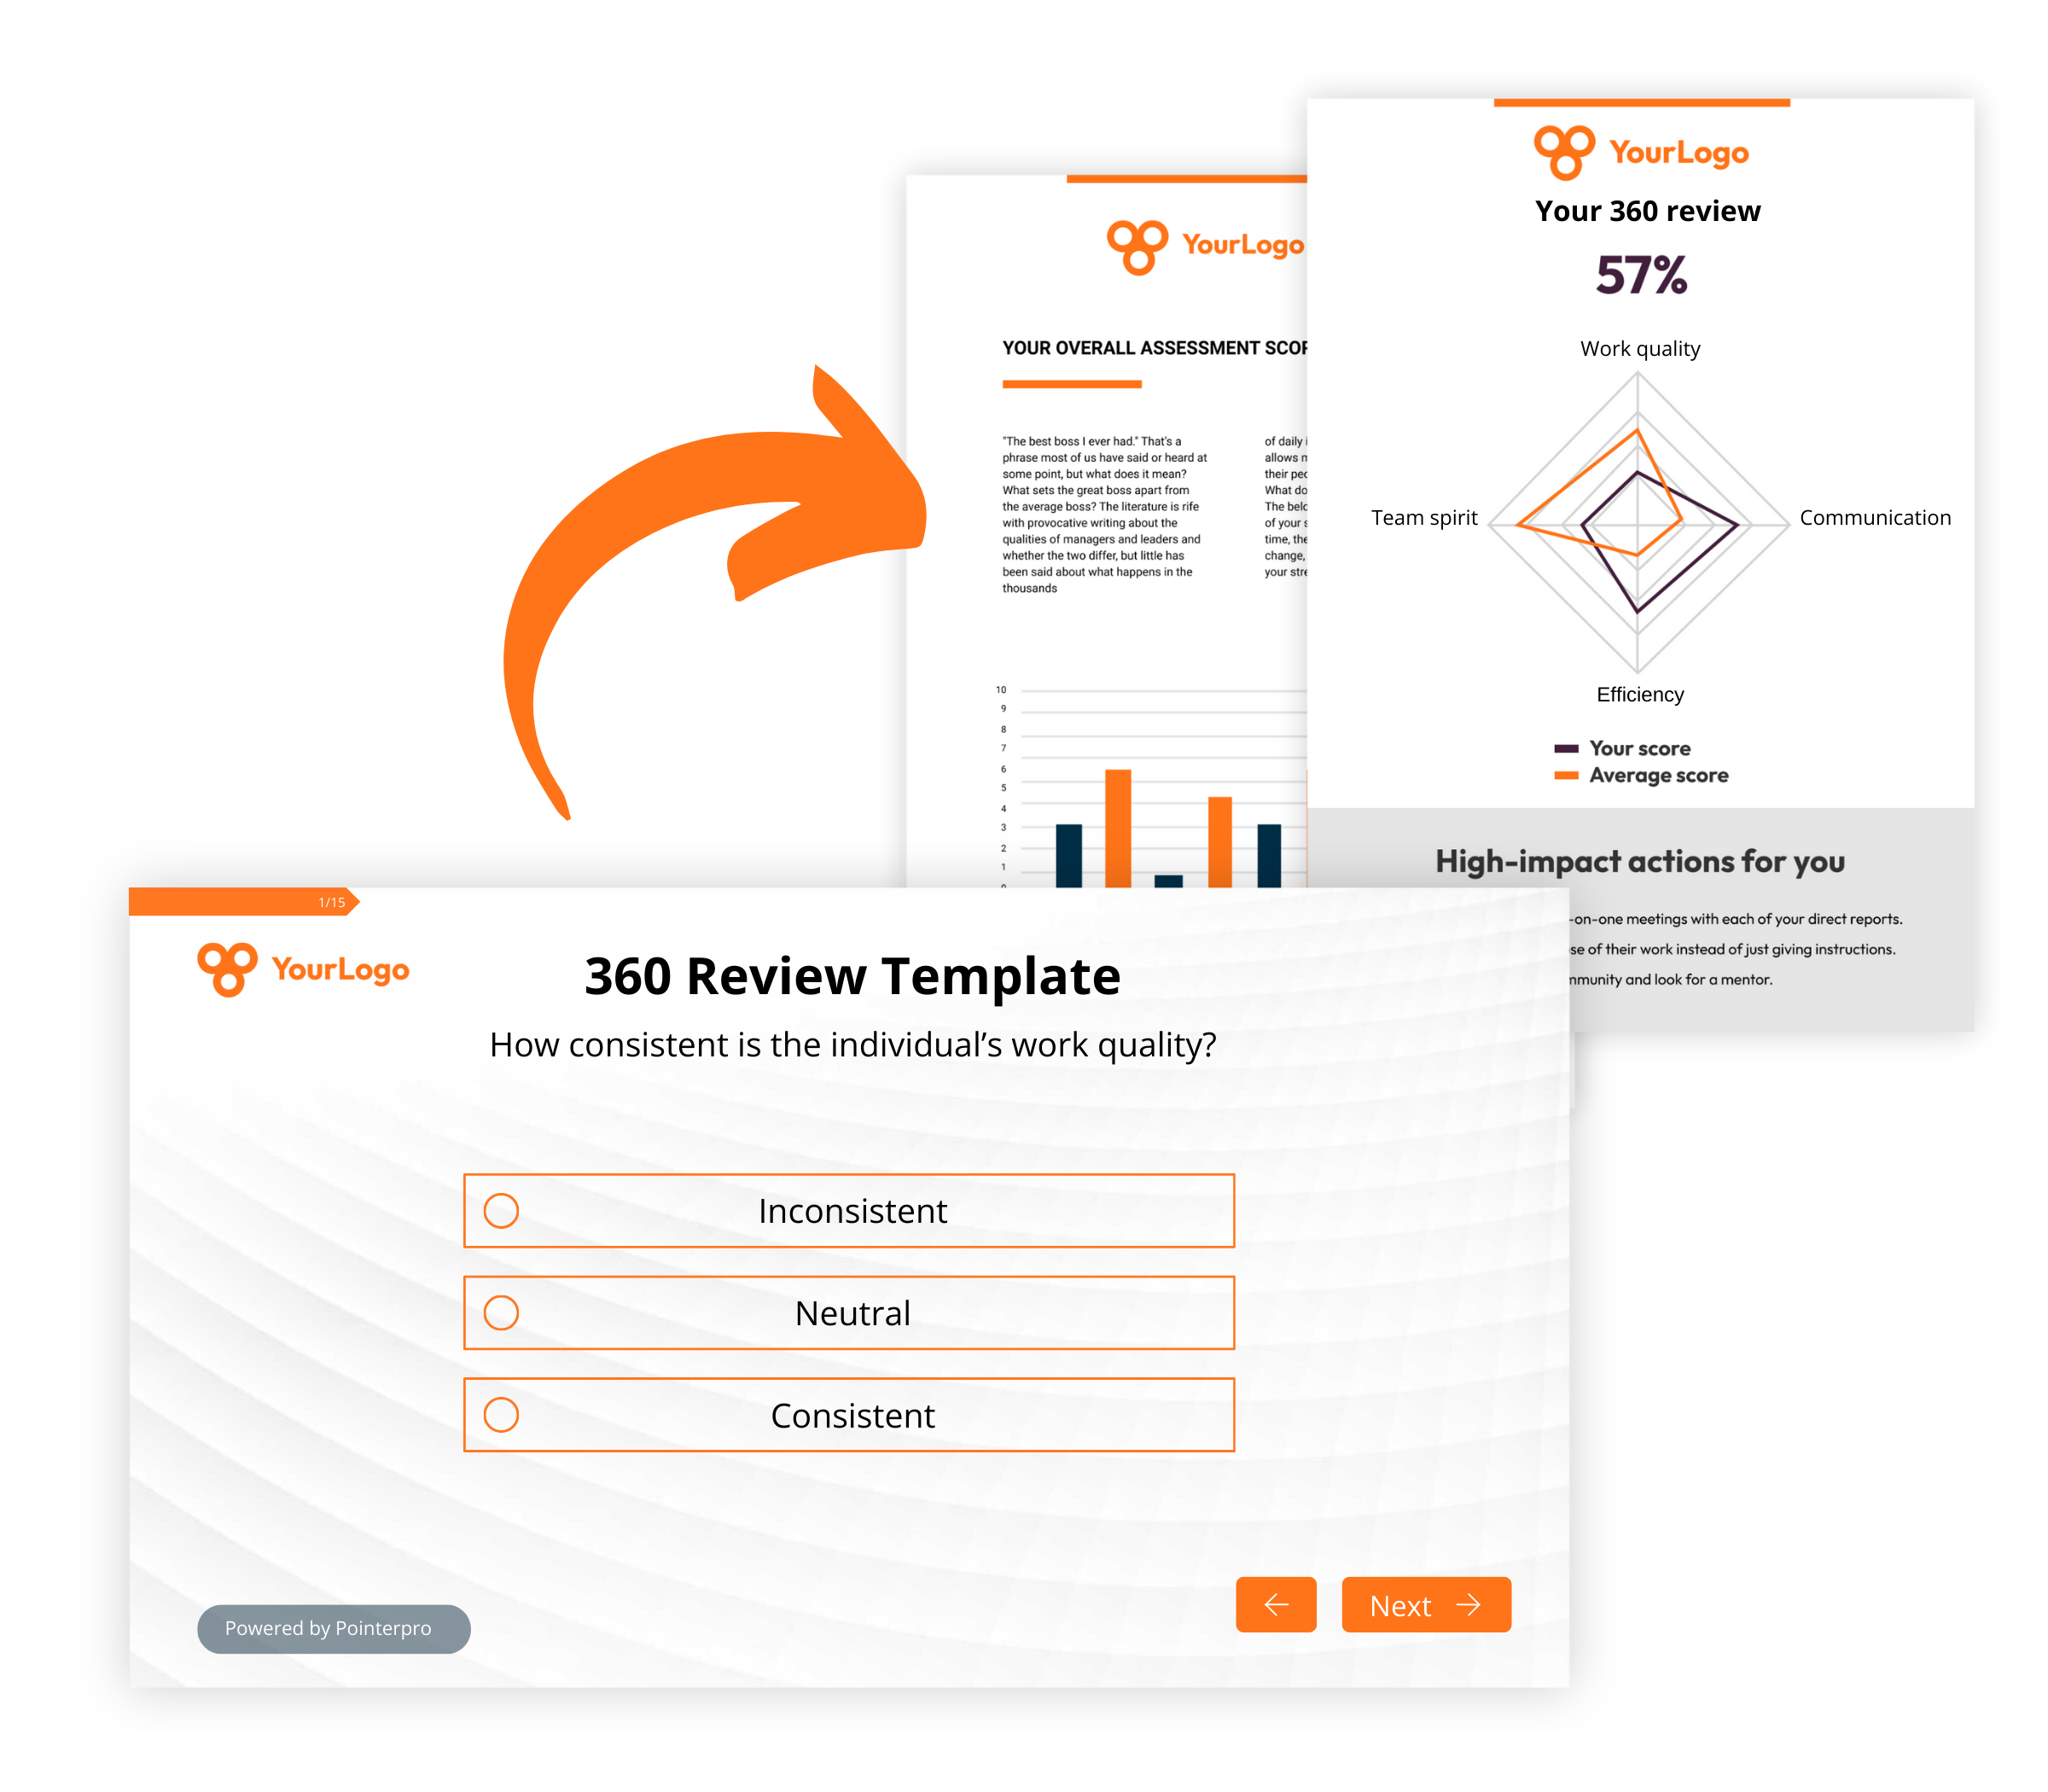 An example of a 360 review template question and personalized report in the Pointerpro tool